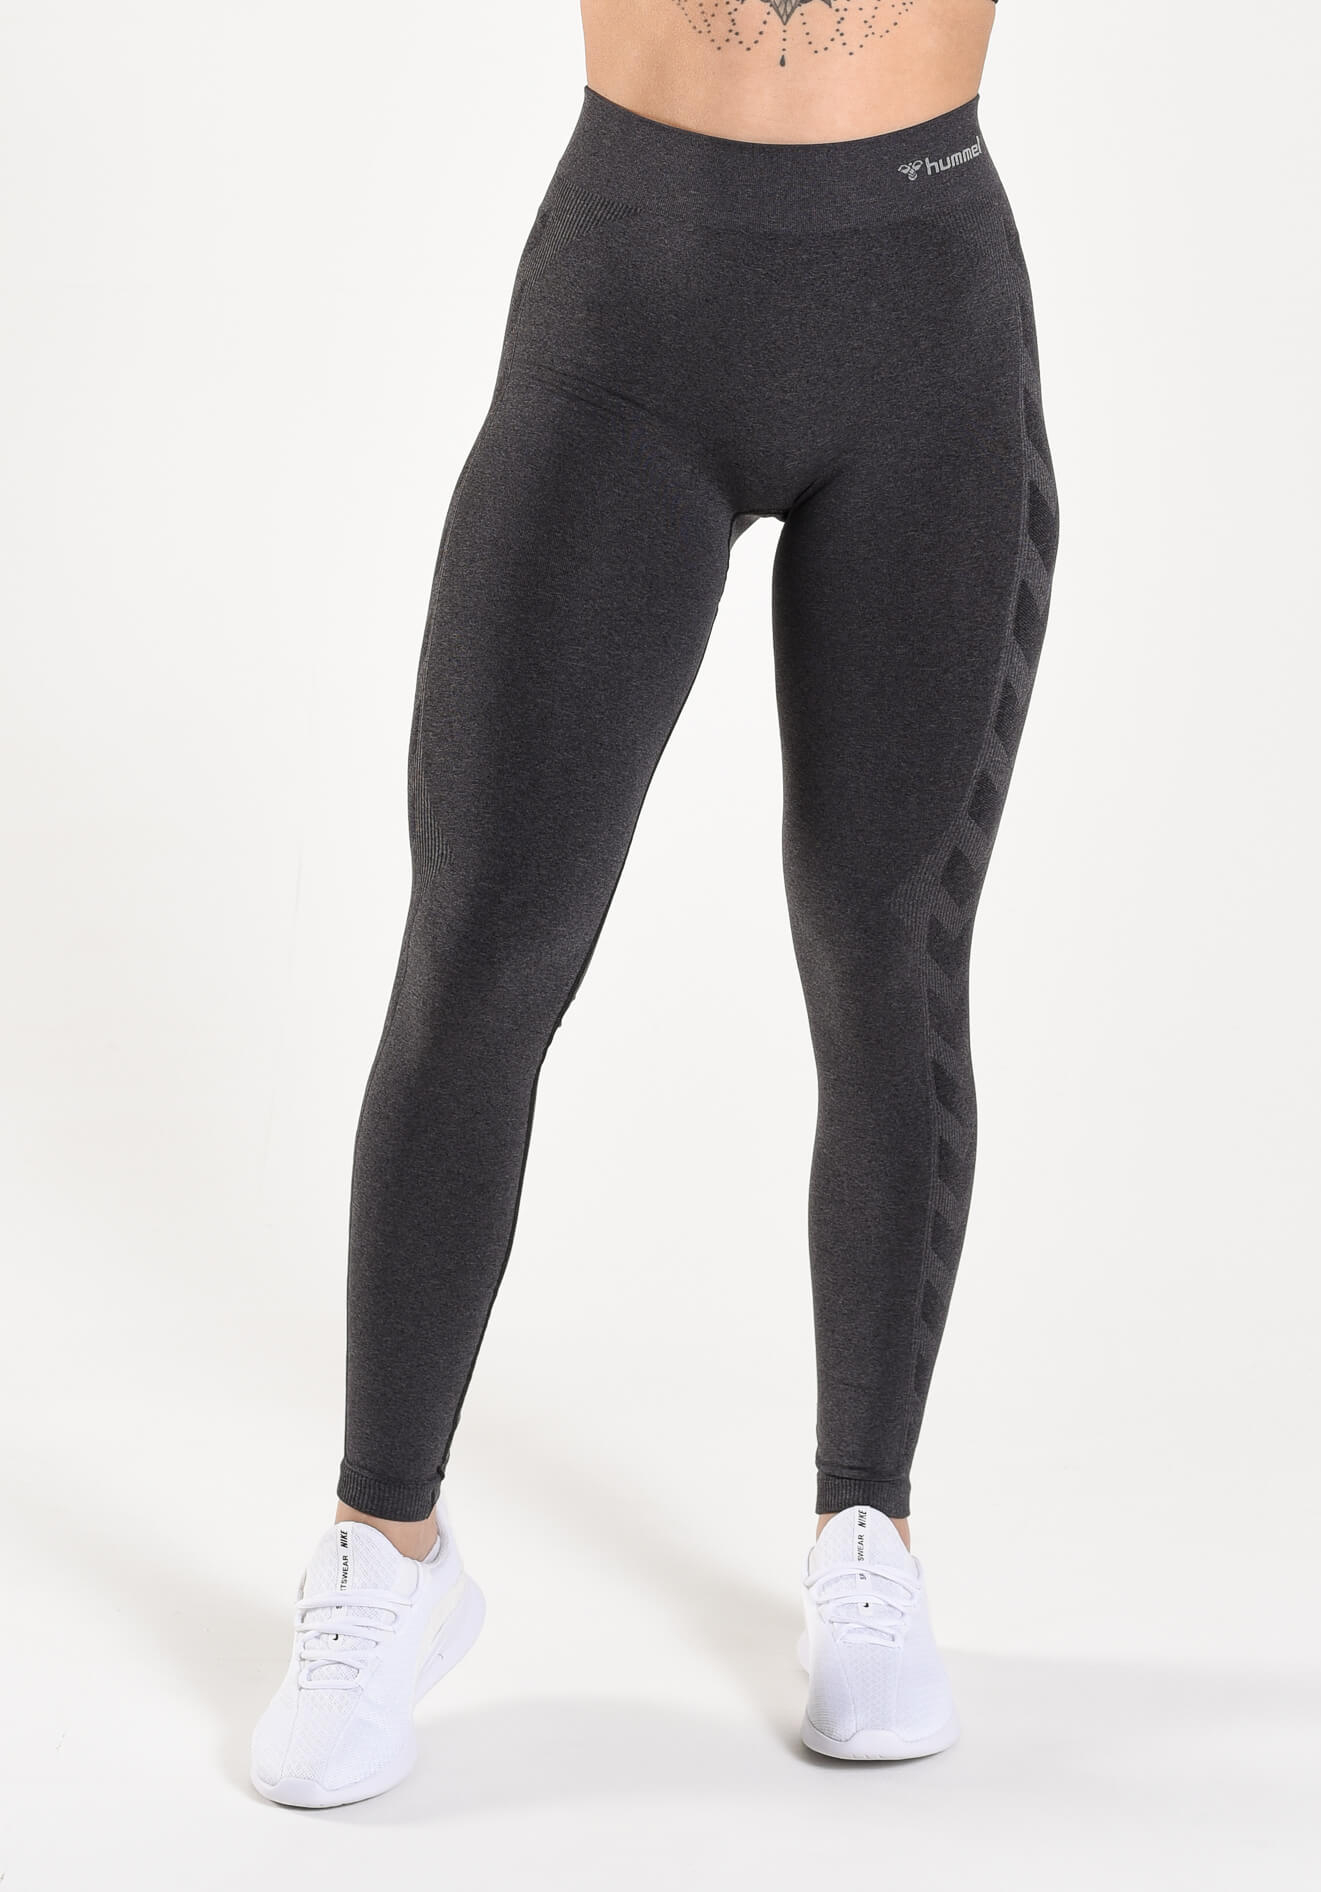 Hummel CI Seamless Tights - One More Rep